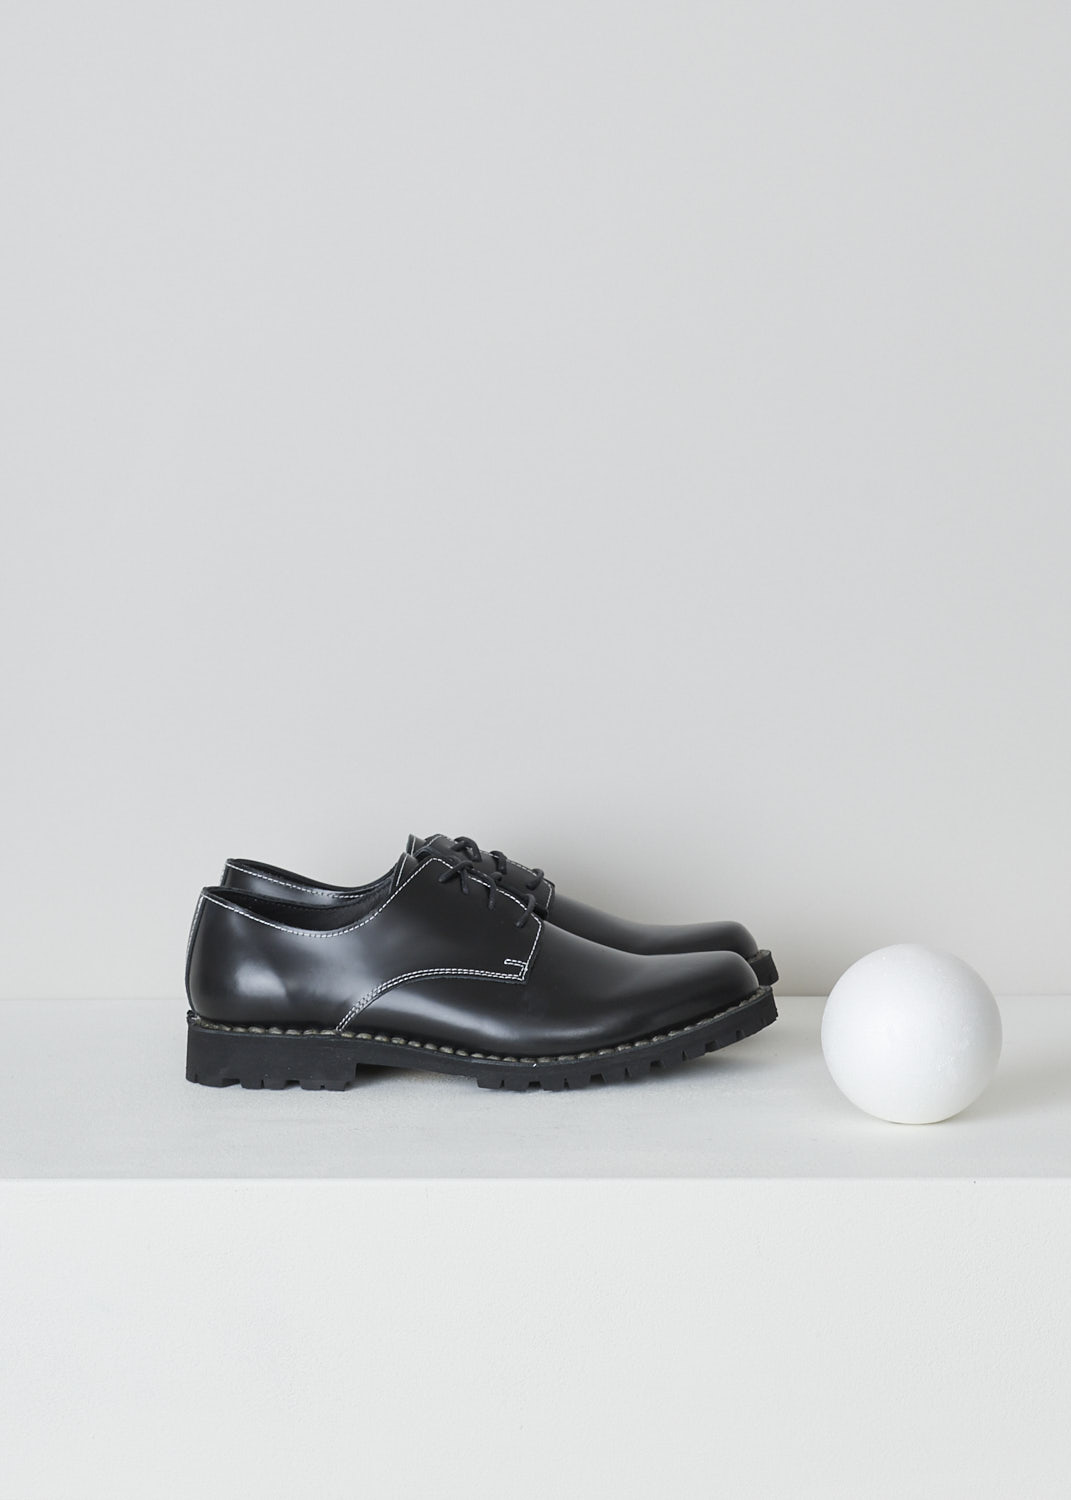 SOFIE Dâ€™HOORE, BLACK DERBY SHOES WITH WHITE STITCHING, FILOS_LJAZ_BLACK,  Black, Side, These black leather derby shoes have a round nose and a classic lace-up closing with black laces. Contrasting white stitching is used throughout. The shoes have sturdy Vibram soles. 
